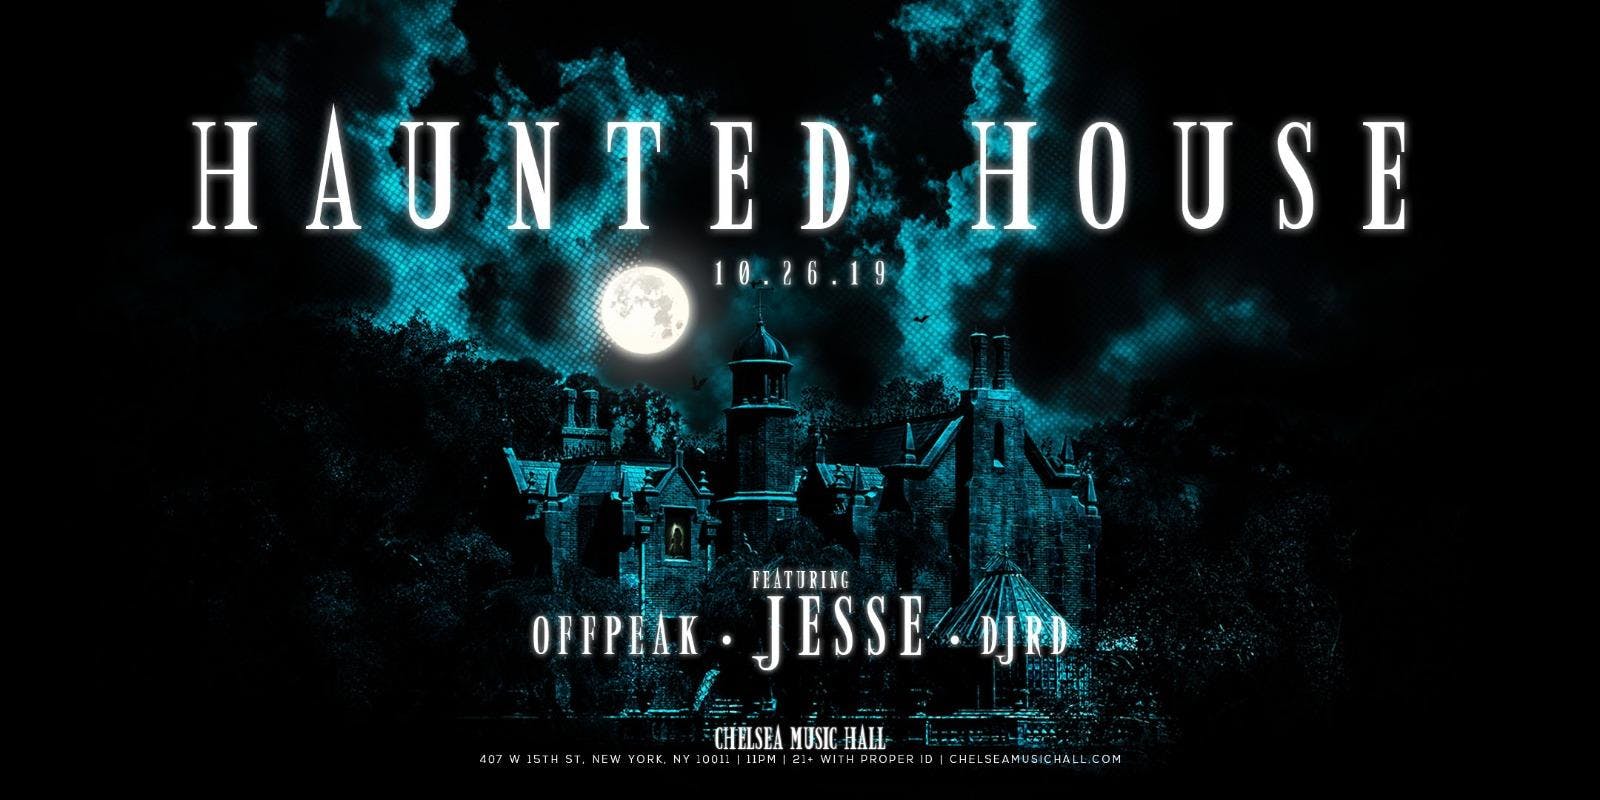 Haunted House at Chelsea Music Hall Halloween Party 10/26